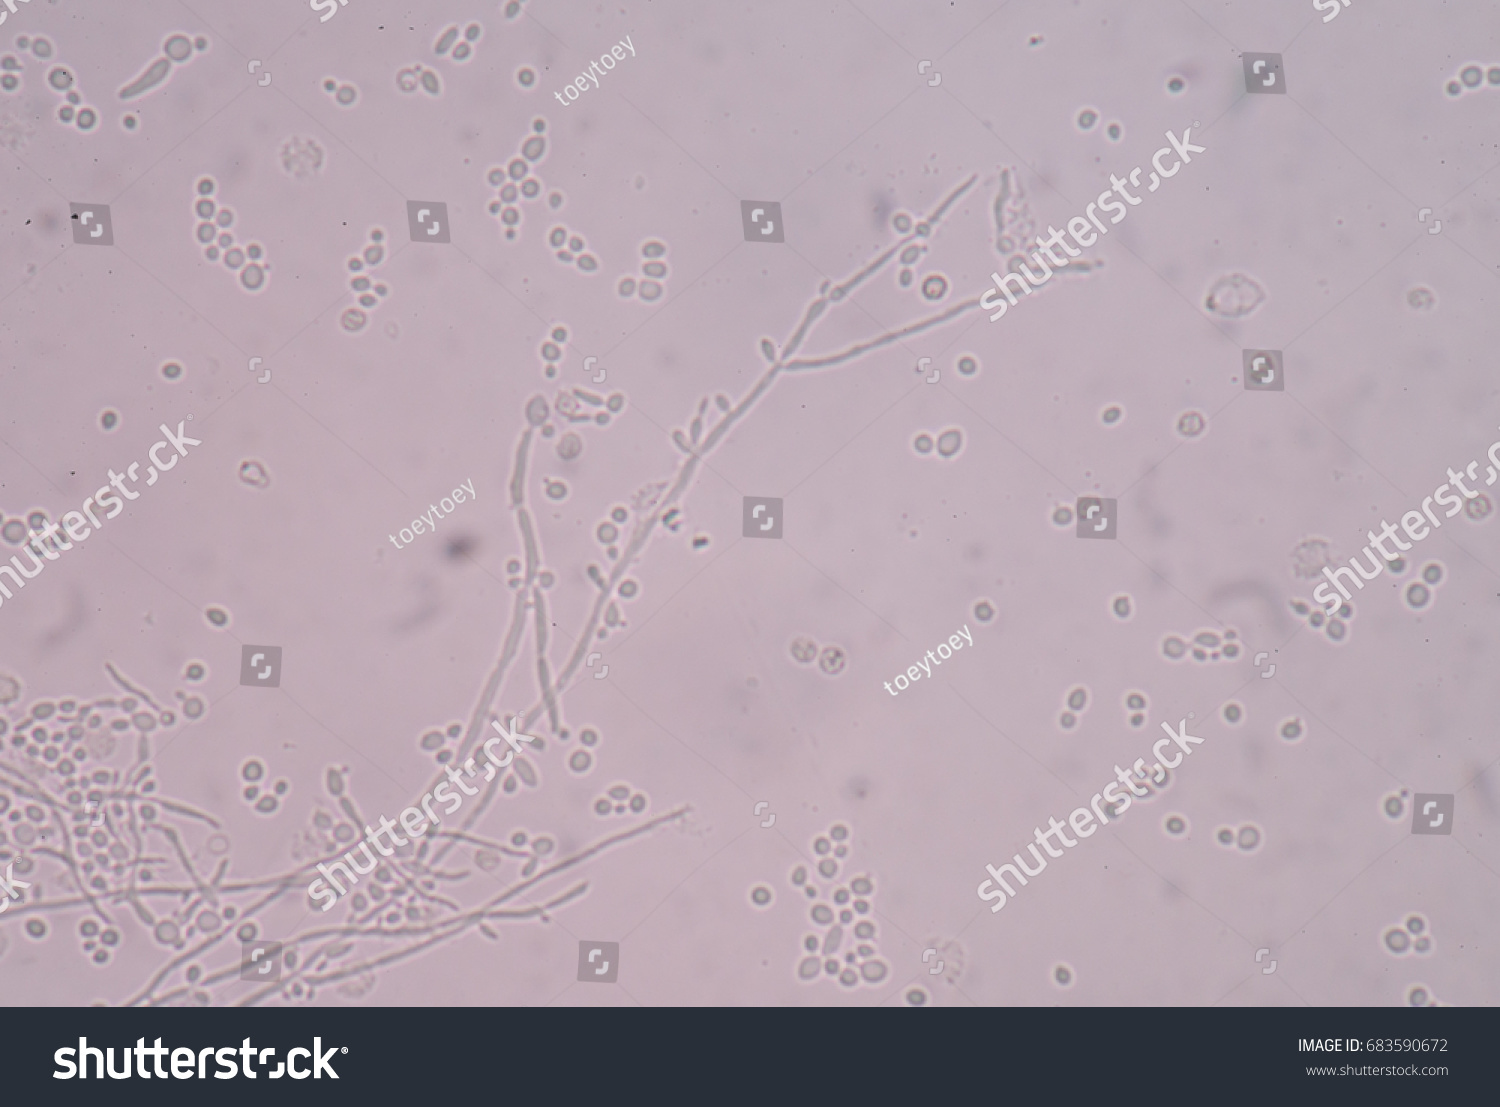 Budding Yeast Cell Structure Fine Microscope Stock Photo 683590672 ...